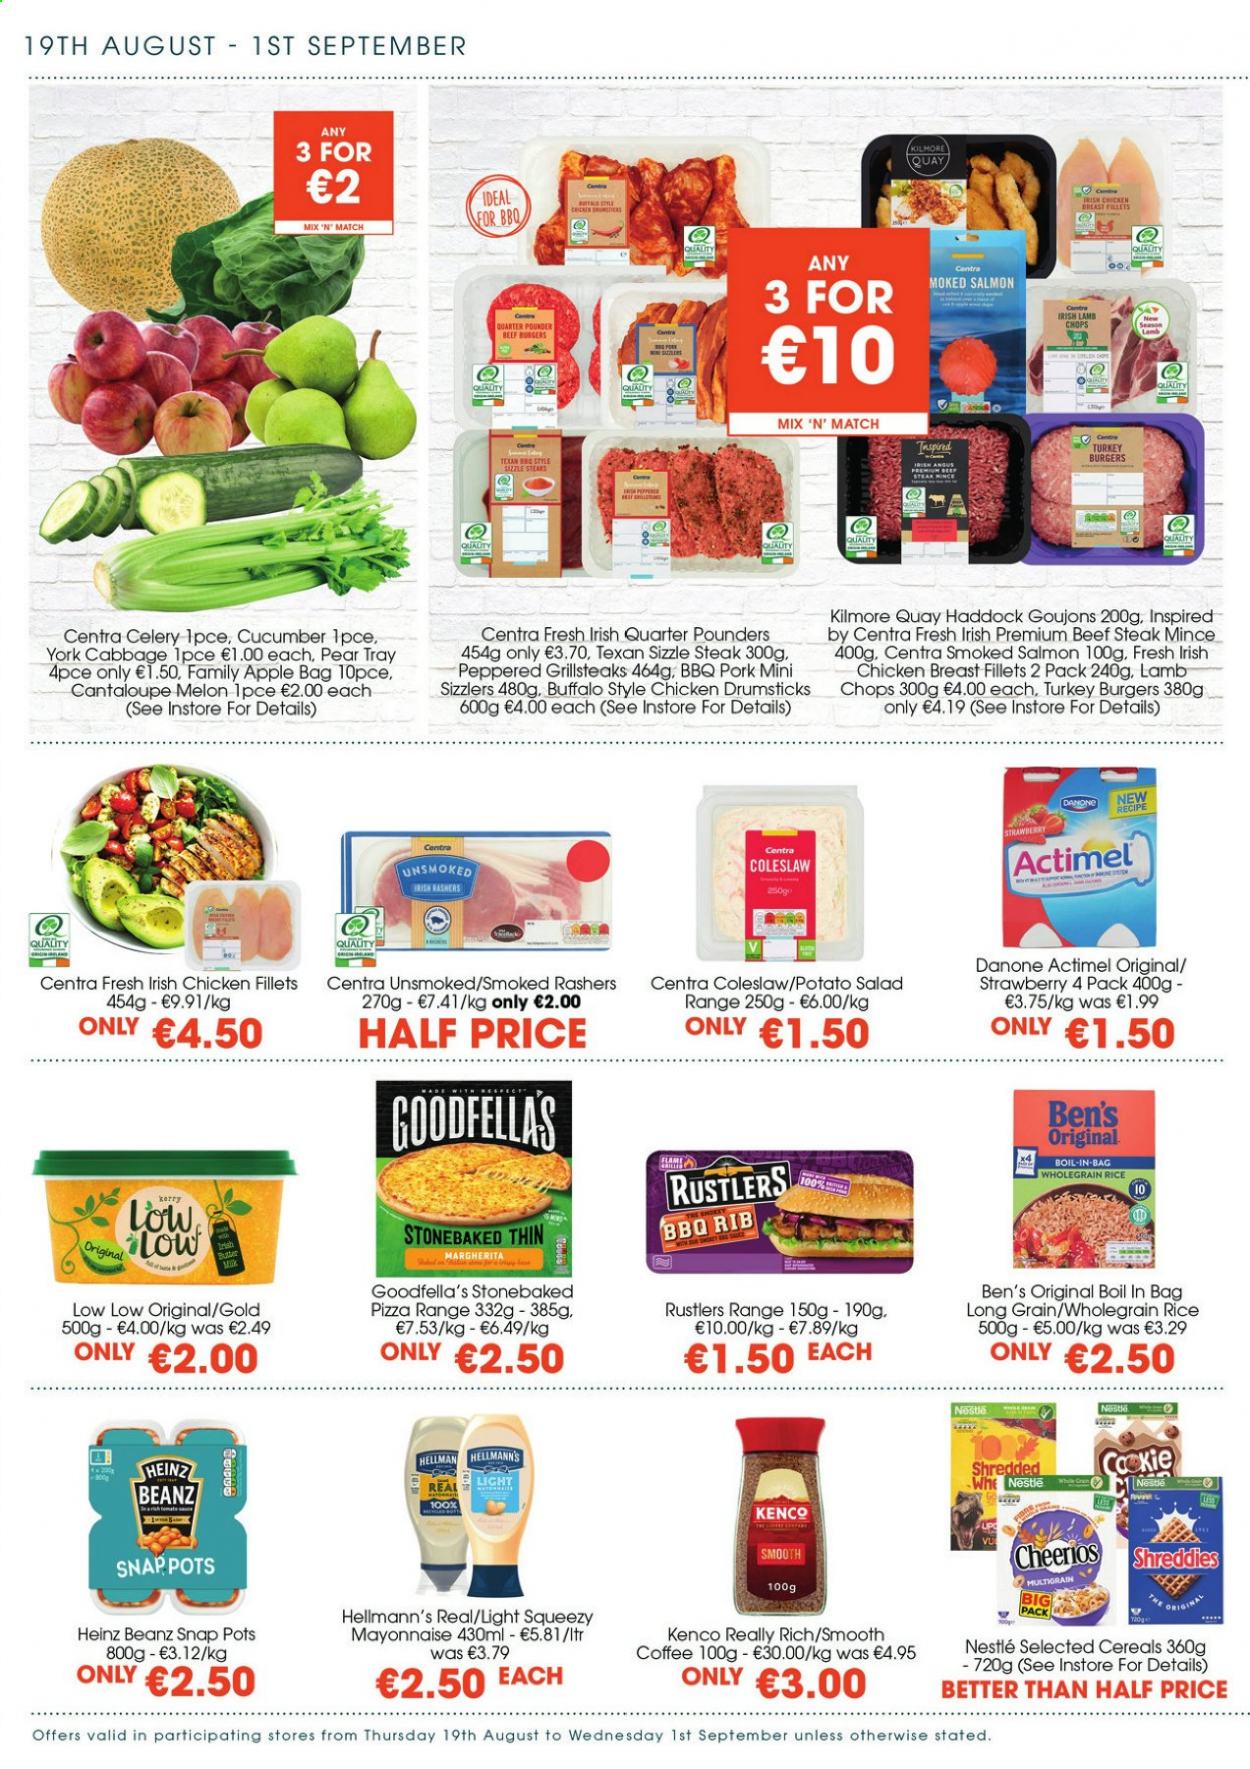 thumbnail - Centra offer  - 19.08.2021 - 01.09.2021 - Sales products - cabbage, cantaloupe, pears, melons, salmon, smoked salmon, haddock, coleslaw, pizza, hamburger, beef burger, potato salad, Danone, Actimel, Hellmann’s, Nestlé, Heinz, cereals, Cheerios, rice, whole grain rice, coffee, chicken breasts, chicken drumsticks, beef meat, beef steak, steak, turkey burger, lamb chops, lamb meat, tray. Page 2.